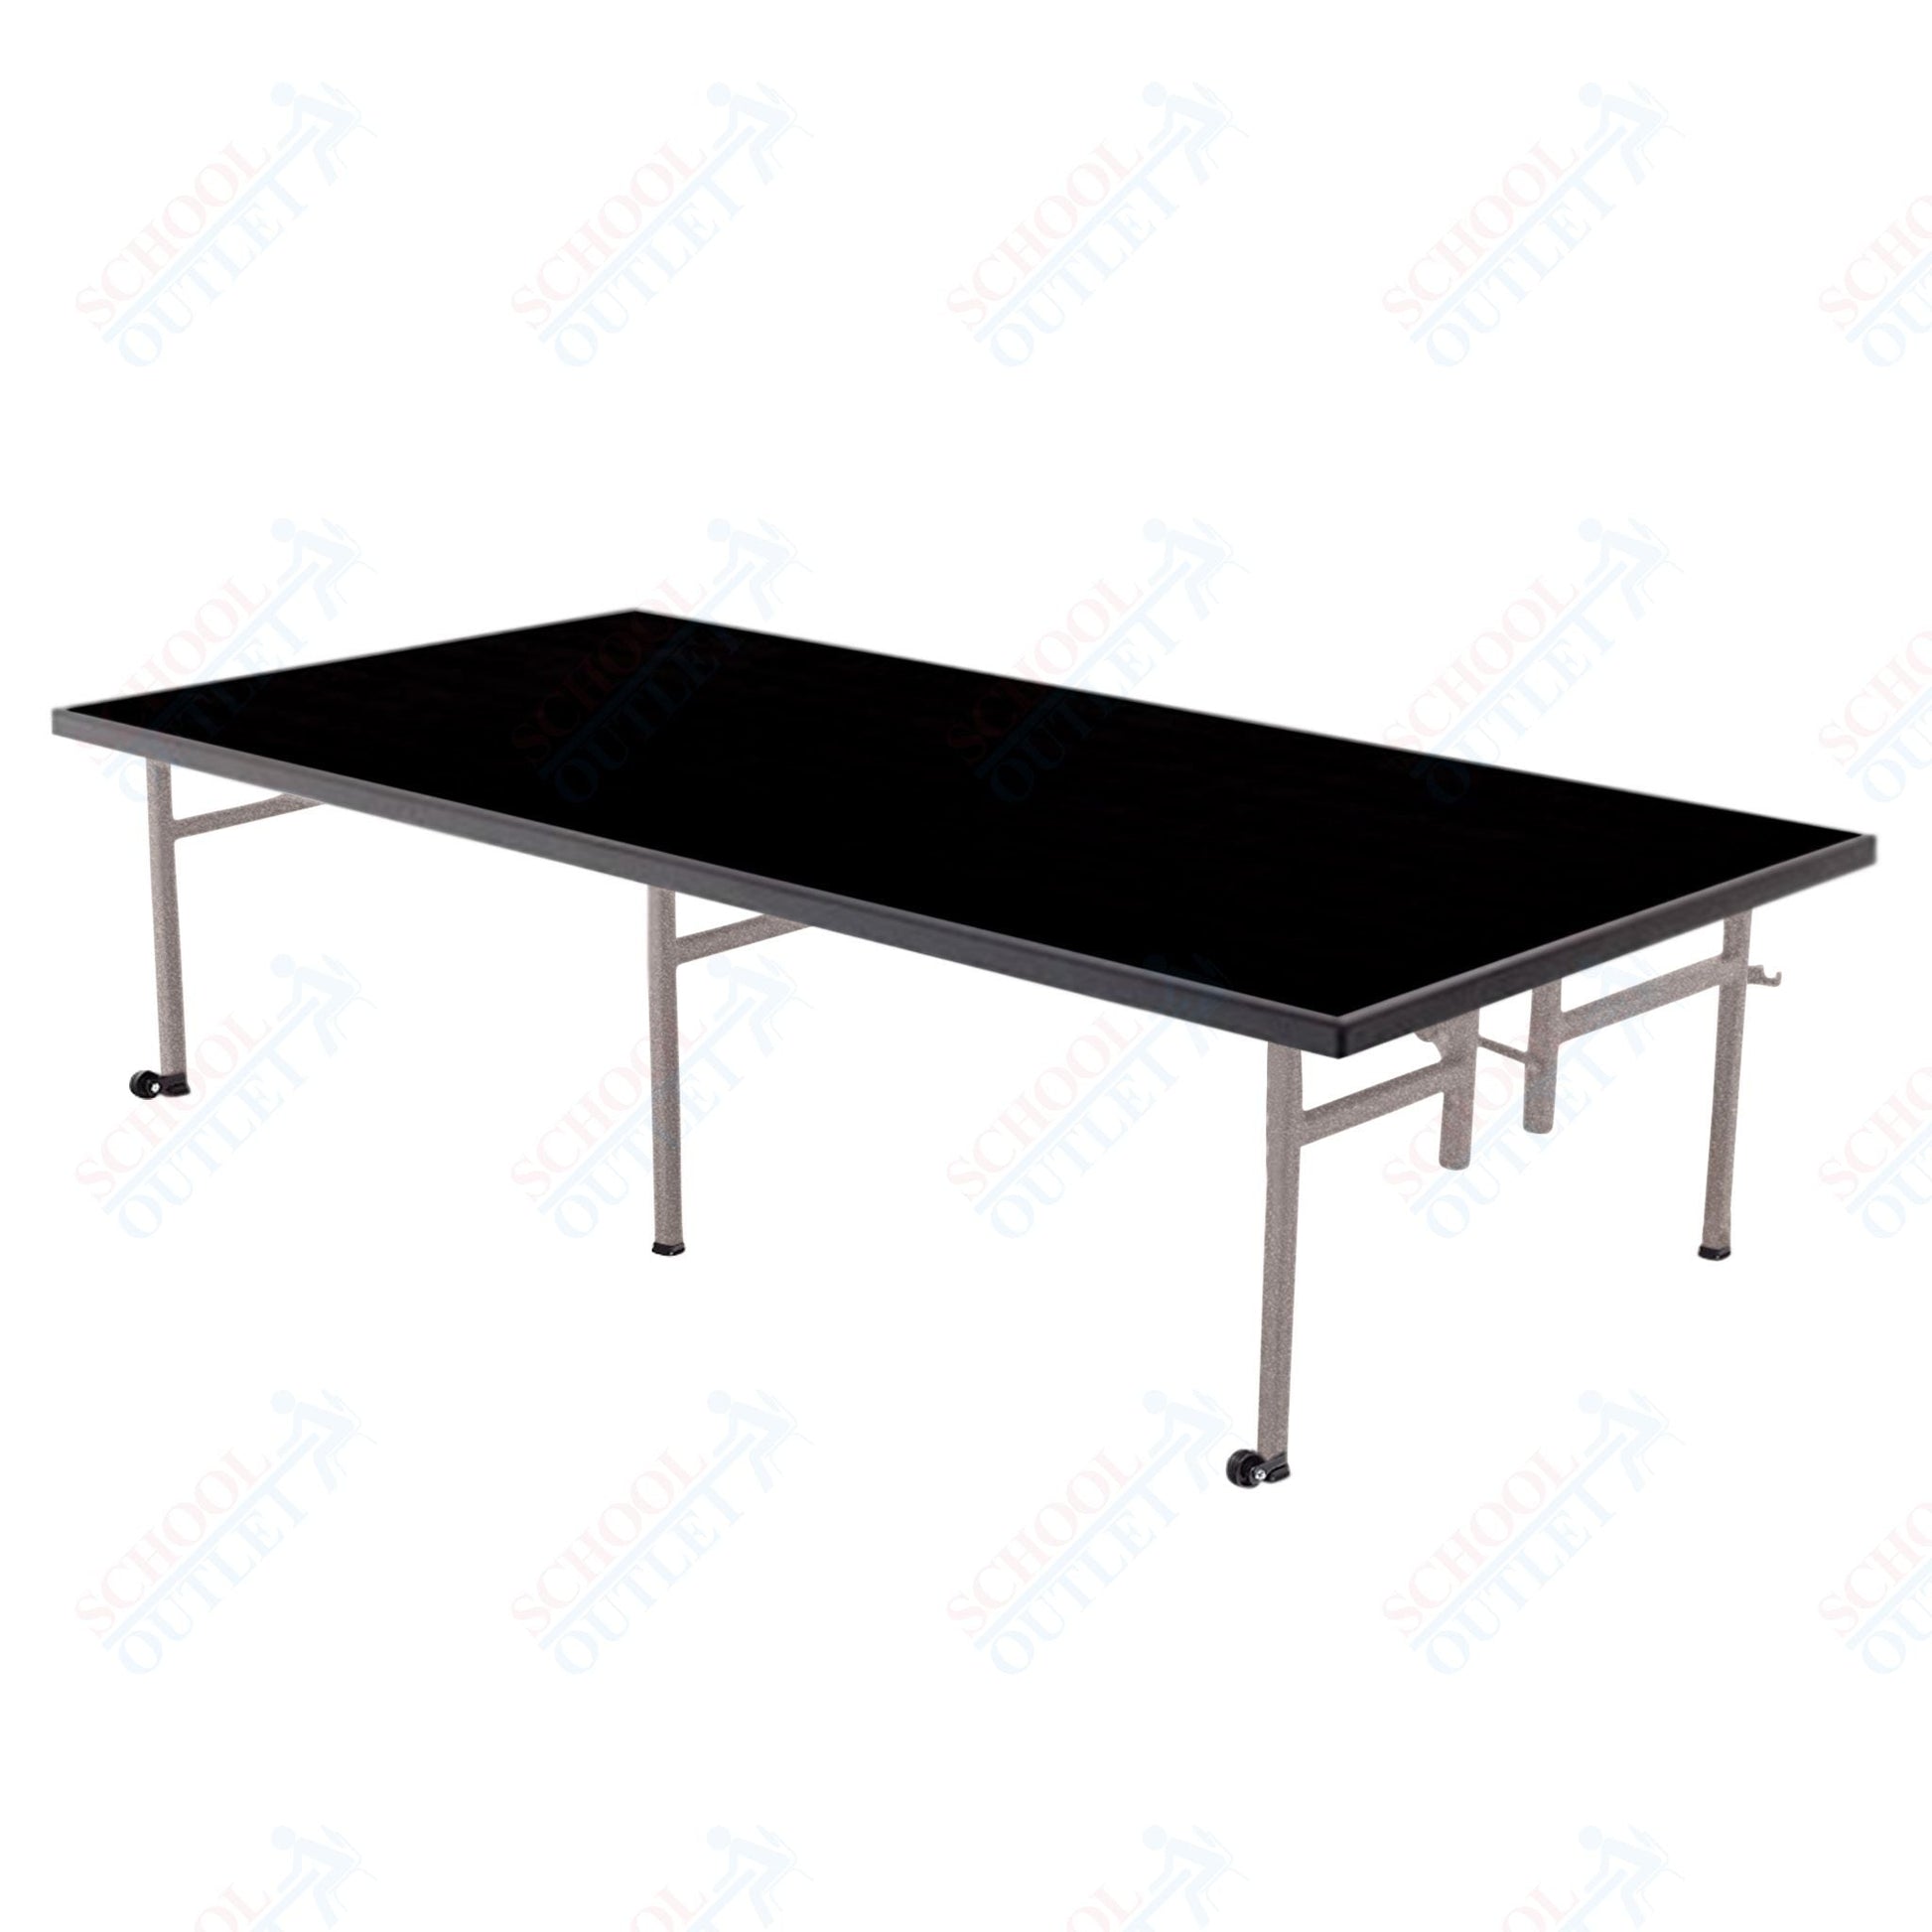 AmTab Fixed Height Stage - Carpet Top - 36"W x 48"L x 16"H (AmTab AMT - ST3416C) - SchoolOutlet